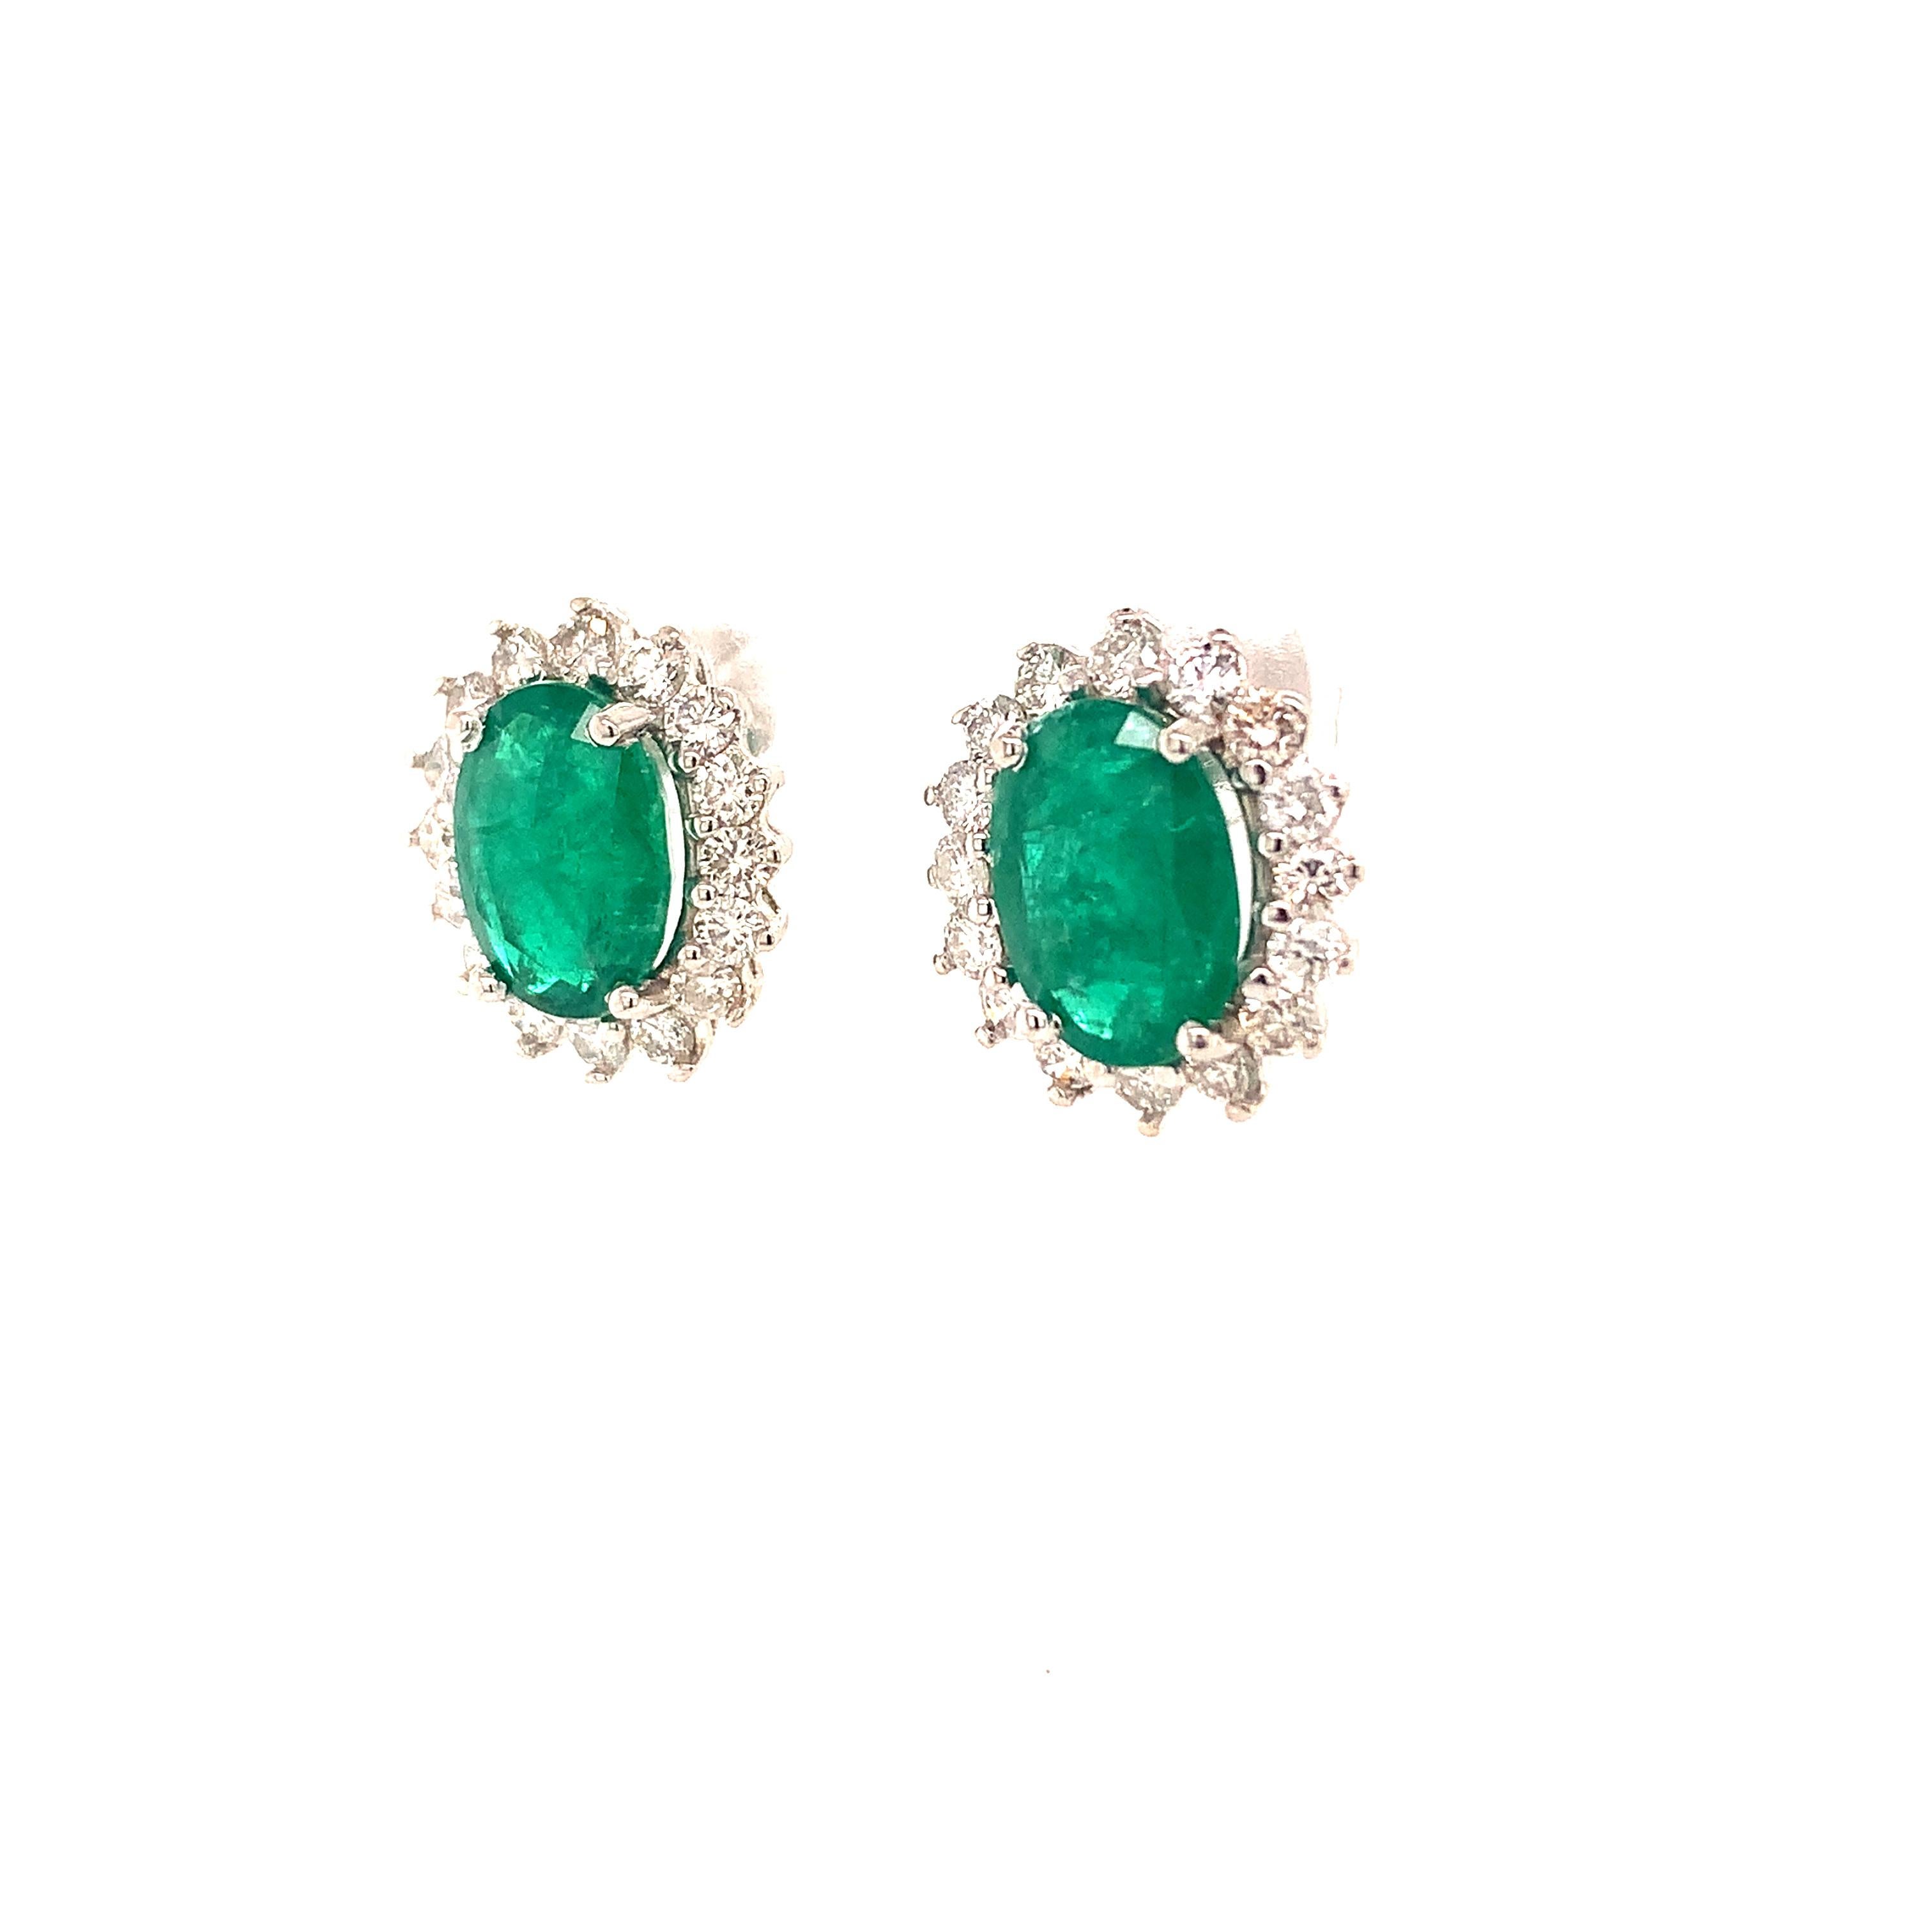 Oval Cut Natural Emerald Diamond Earrings 14k Gold 5.03 TCW Certified For Sale